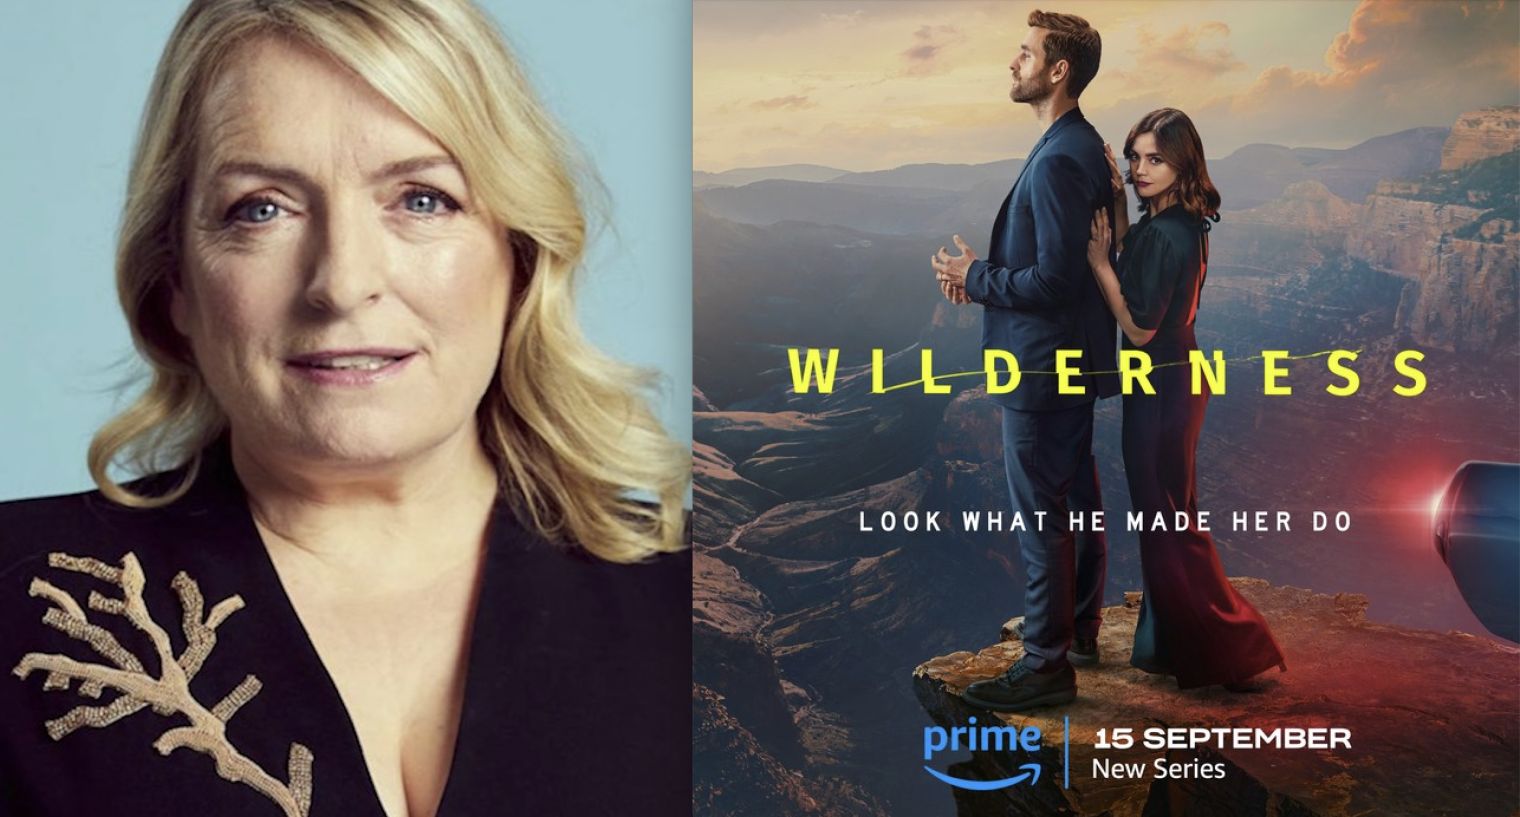  Claire Rushbrook plays Caryl, the mother of Liv (played by Jenna Coleman) in Wilderness which is released on Prime Video on Friday 15th September